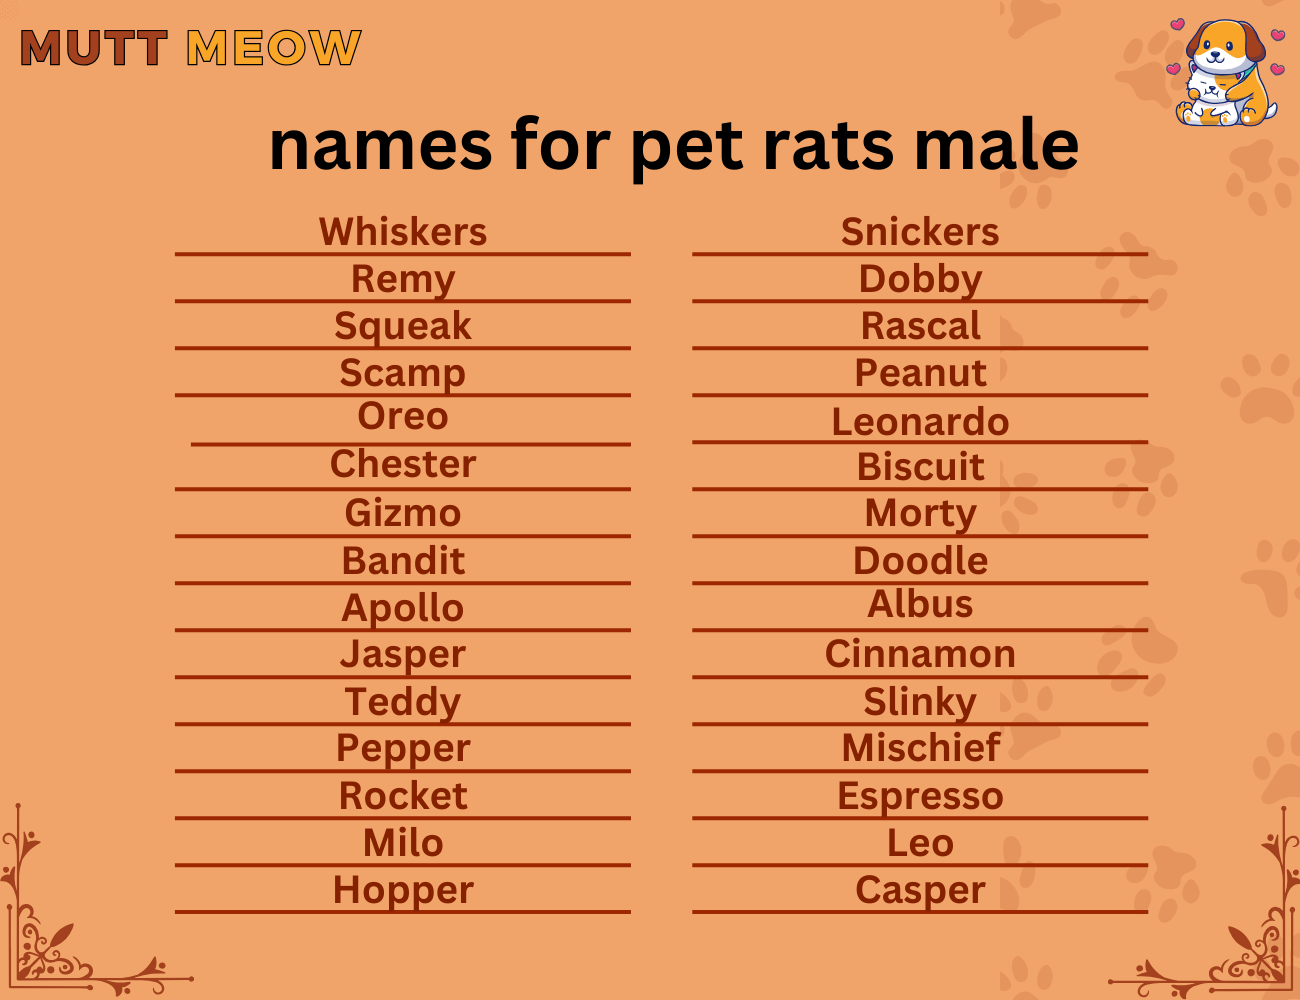 names for pet rats male